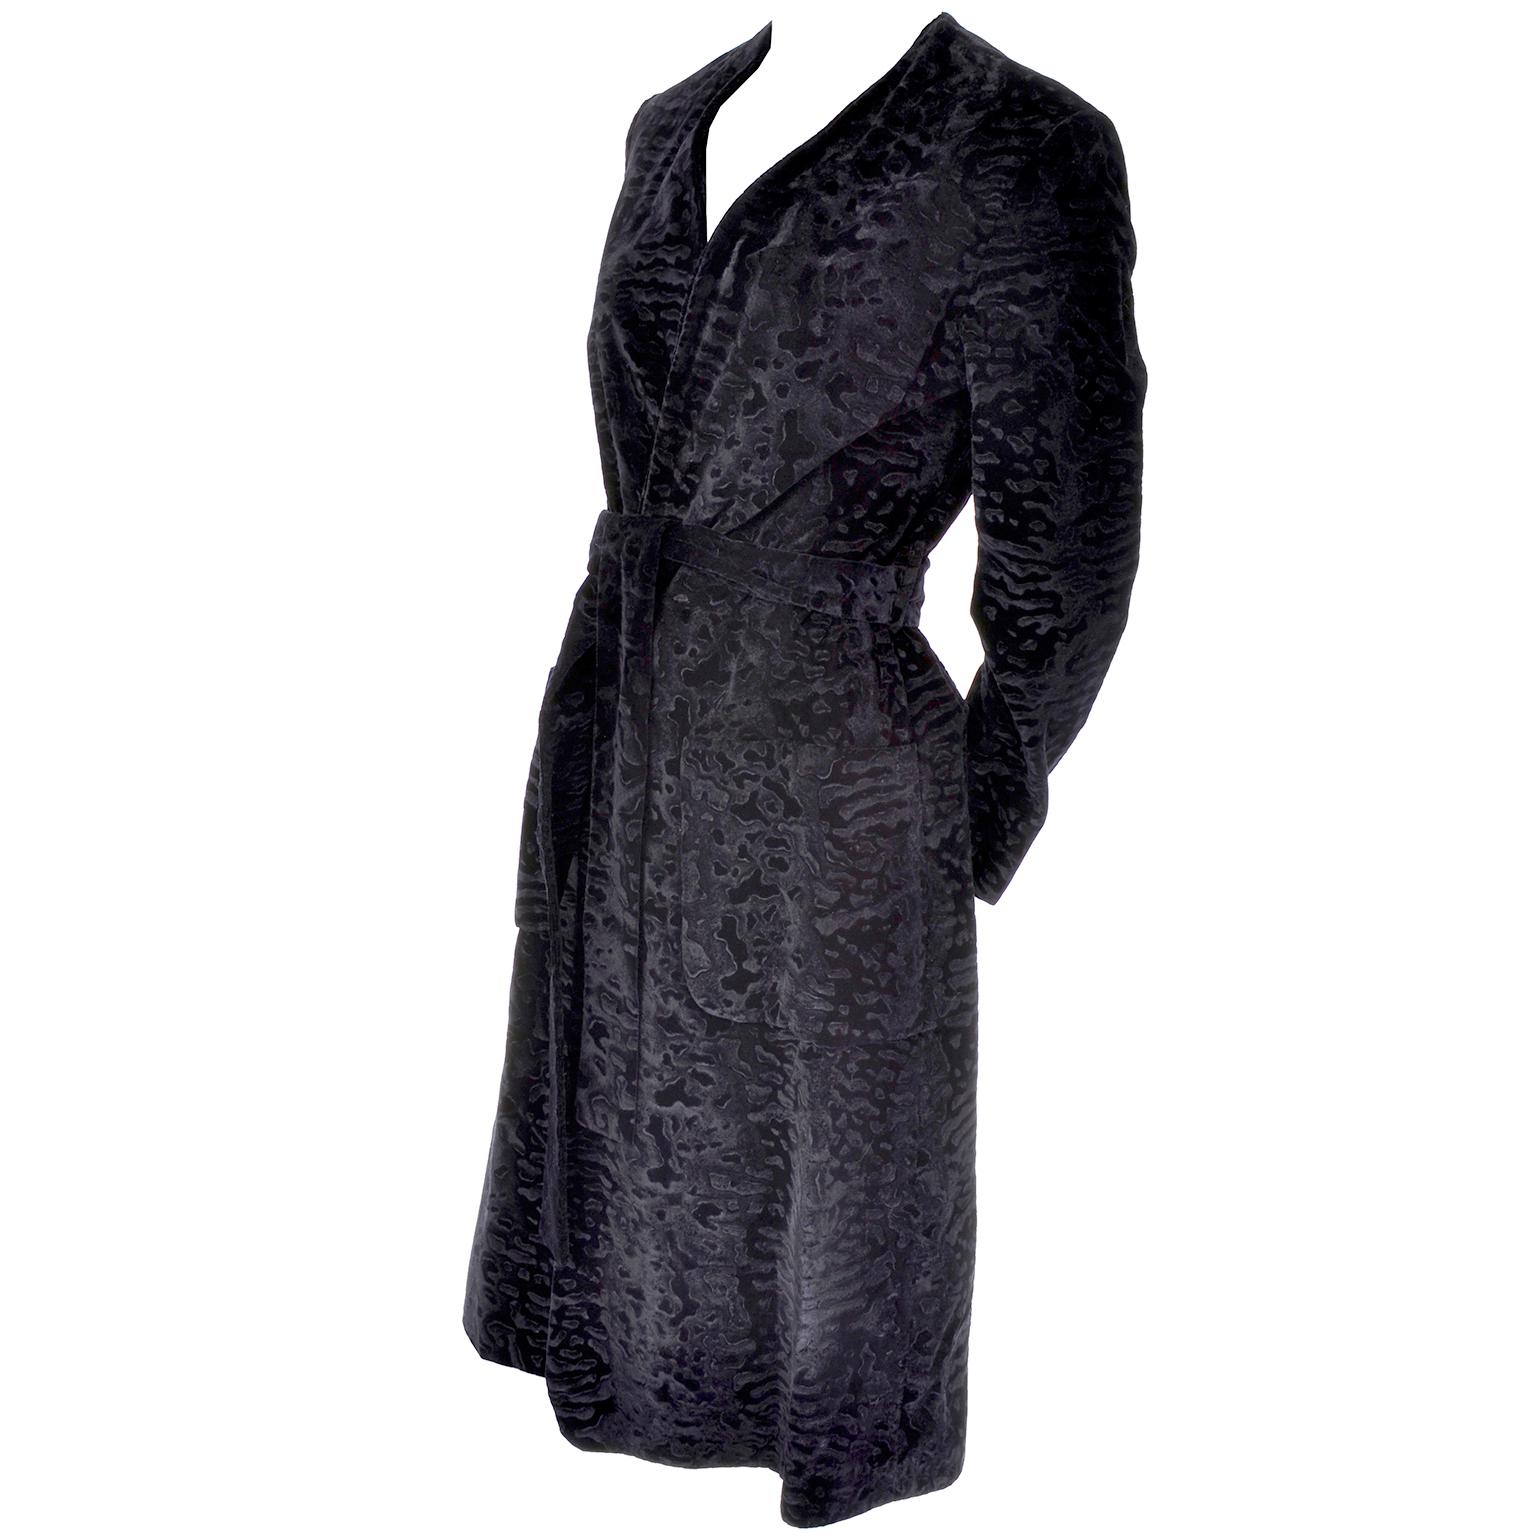 This stunning black late 1970's vintage Bill Blass designer coat has front pockets and a the design of the flocked velvet resembles an animal print or rippling water. This vintage coat fits approximately a US size 4/6 but please look at all of the